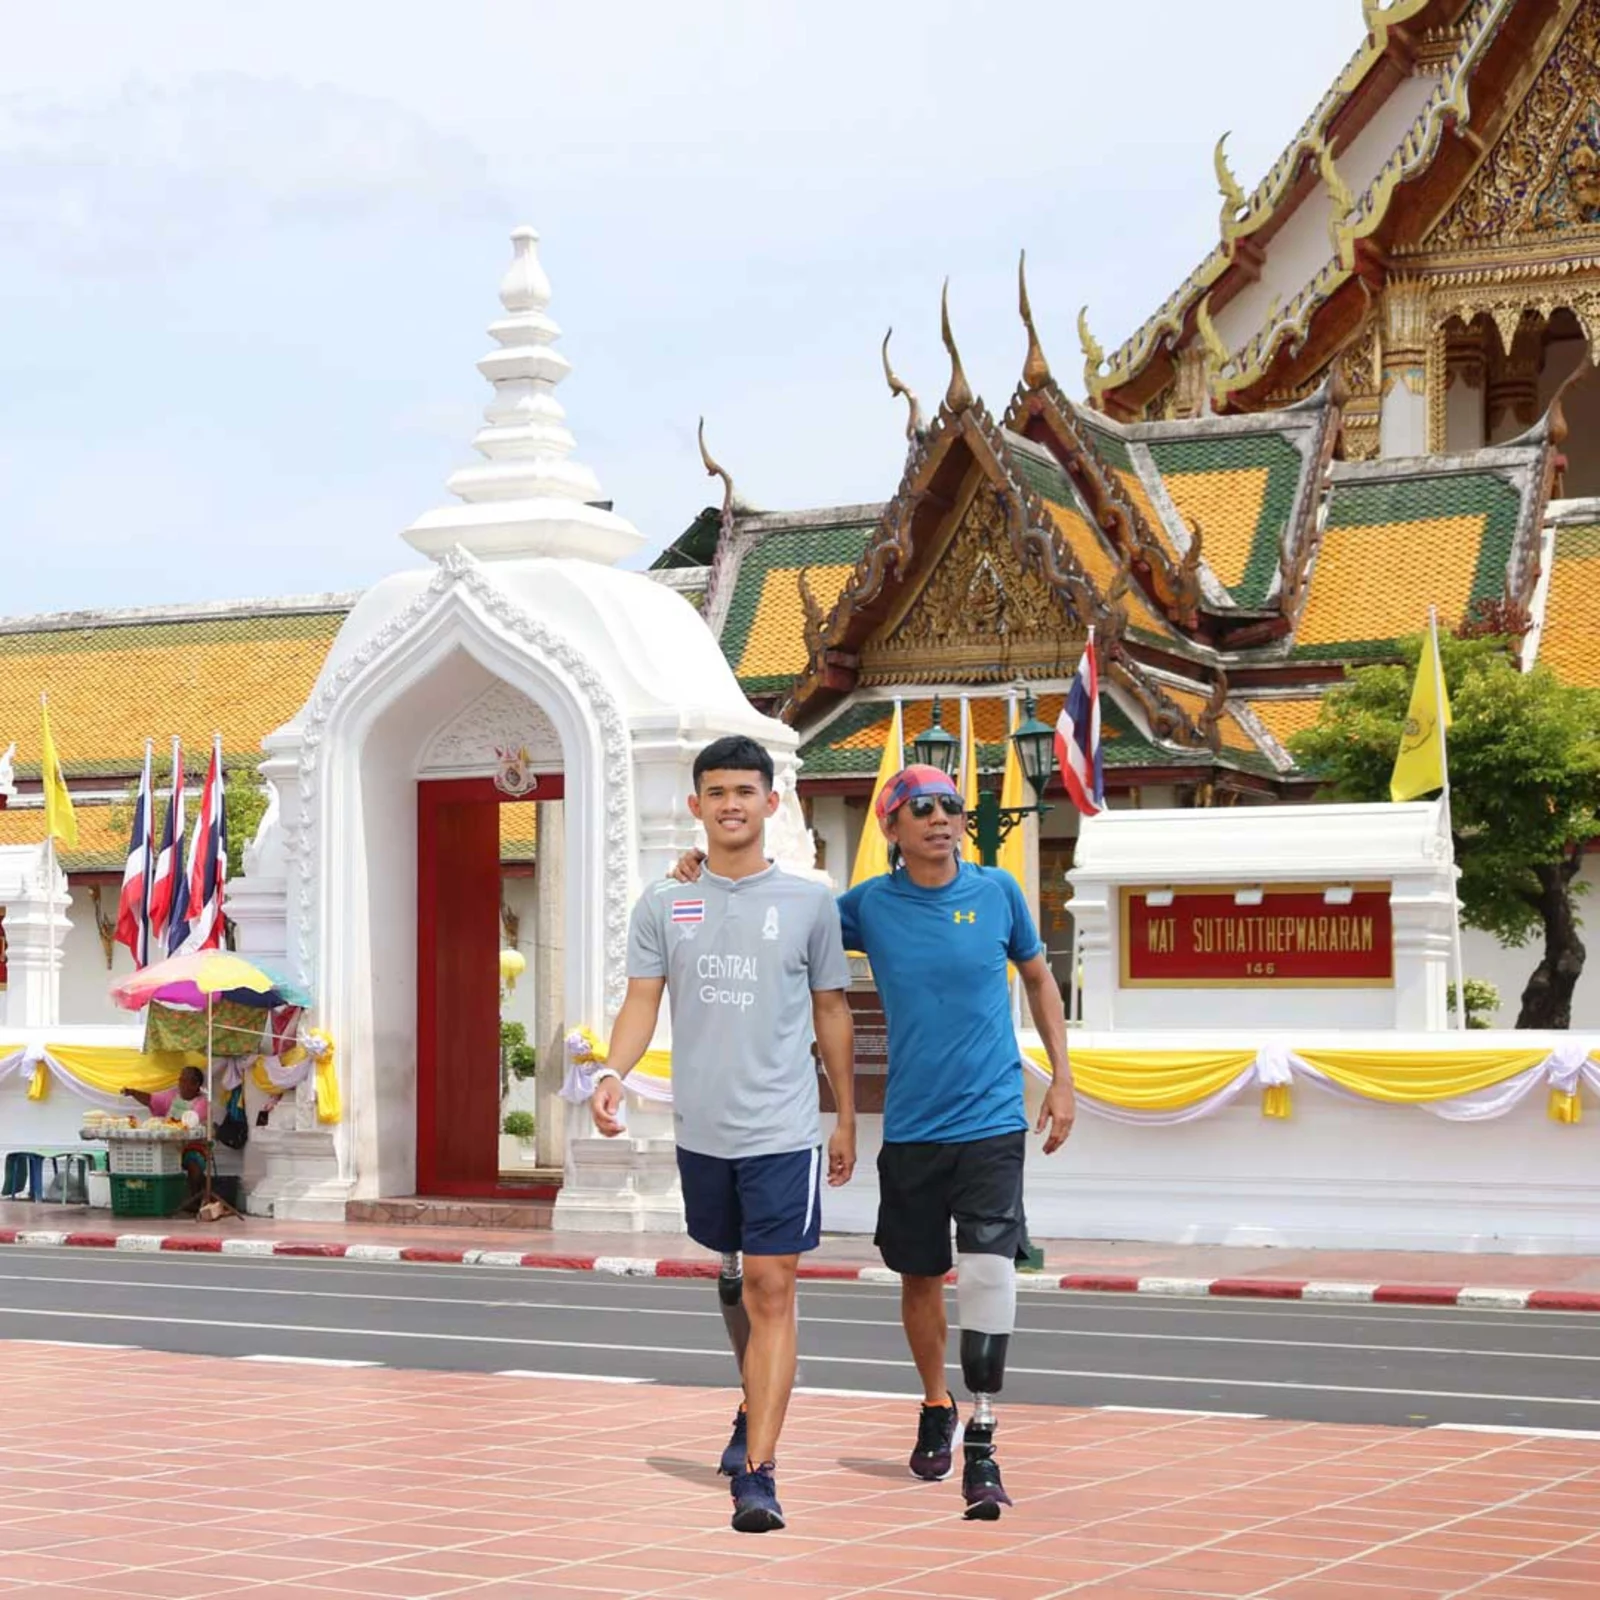 Prosthesis user in Thailand